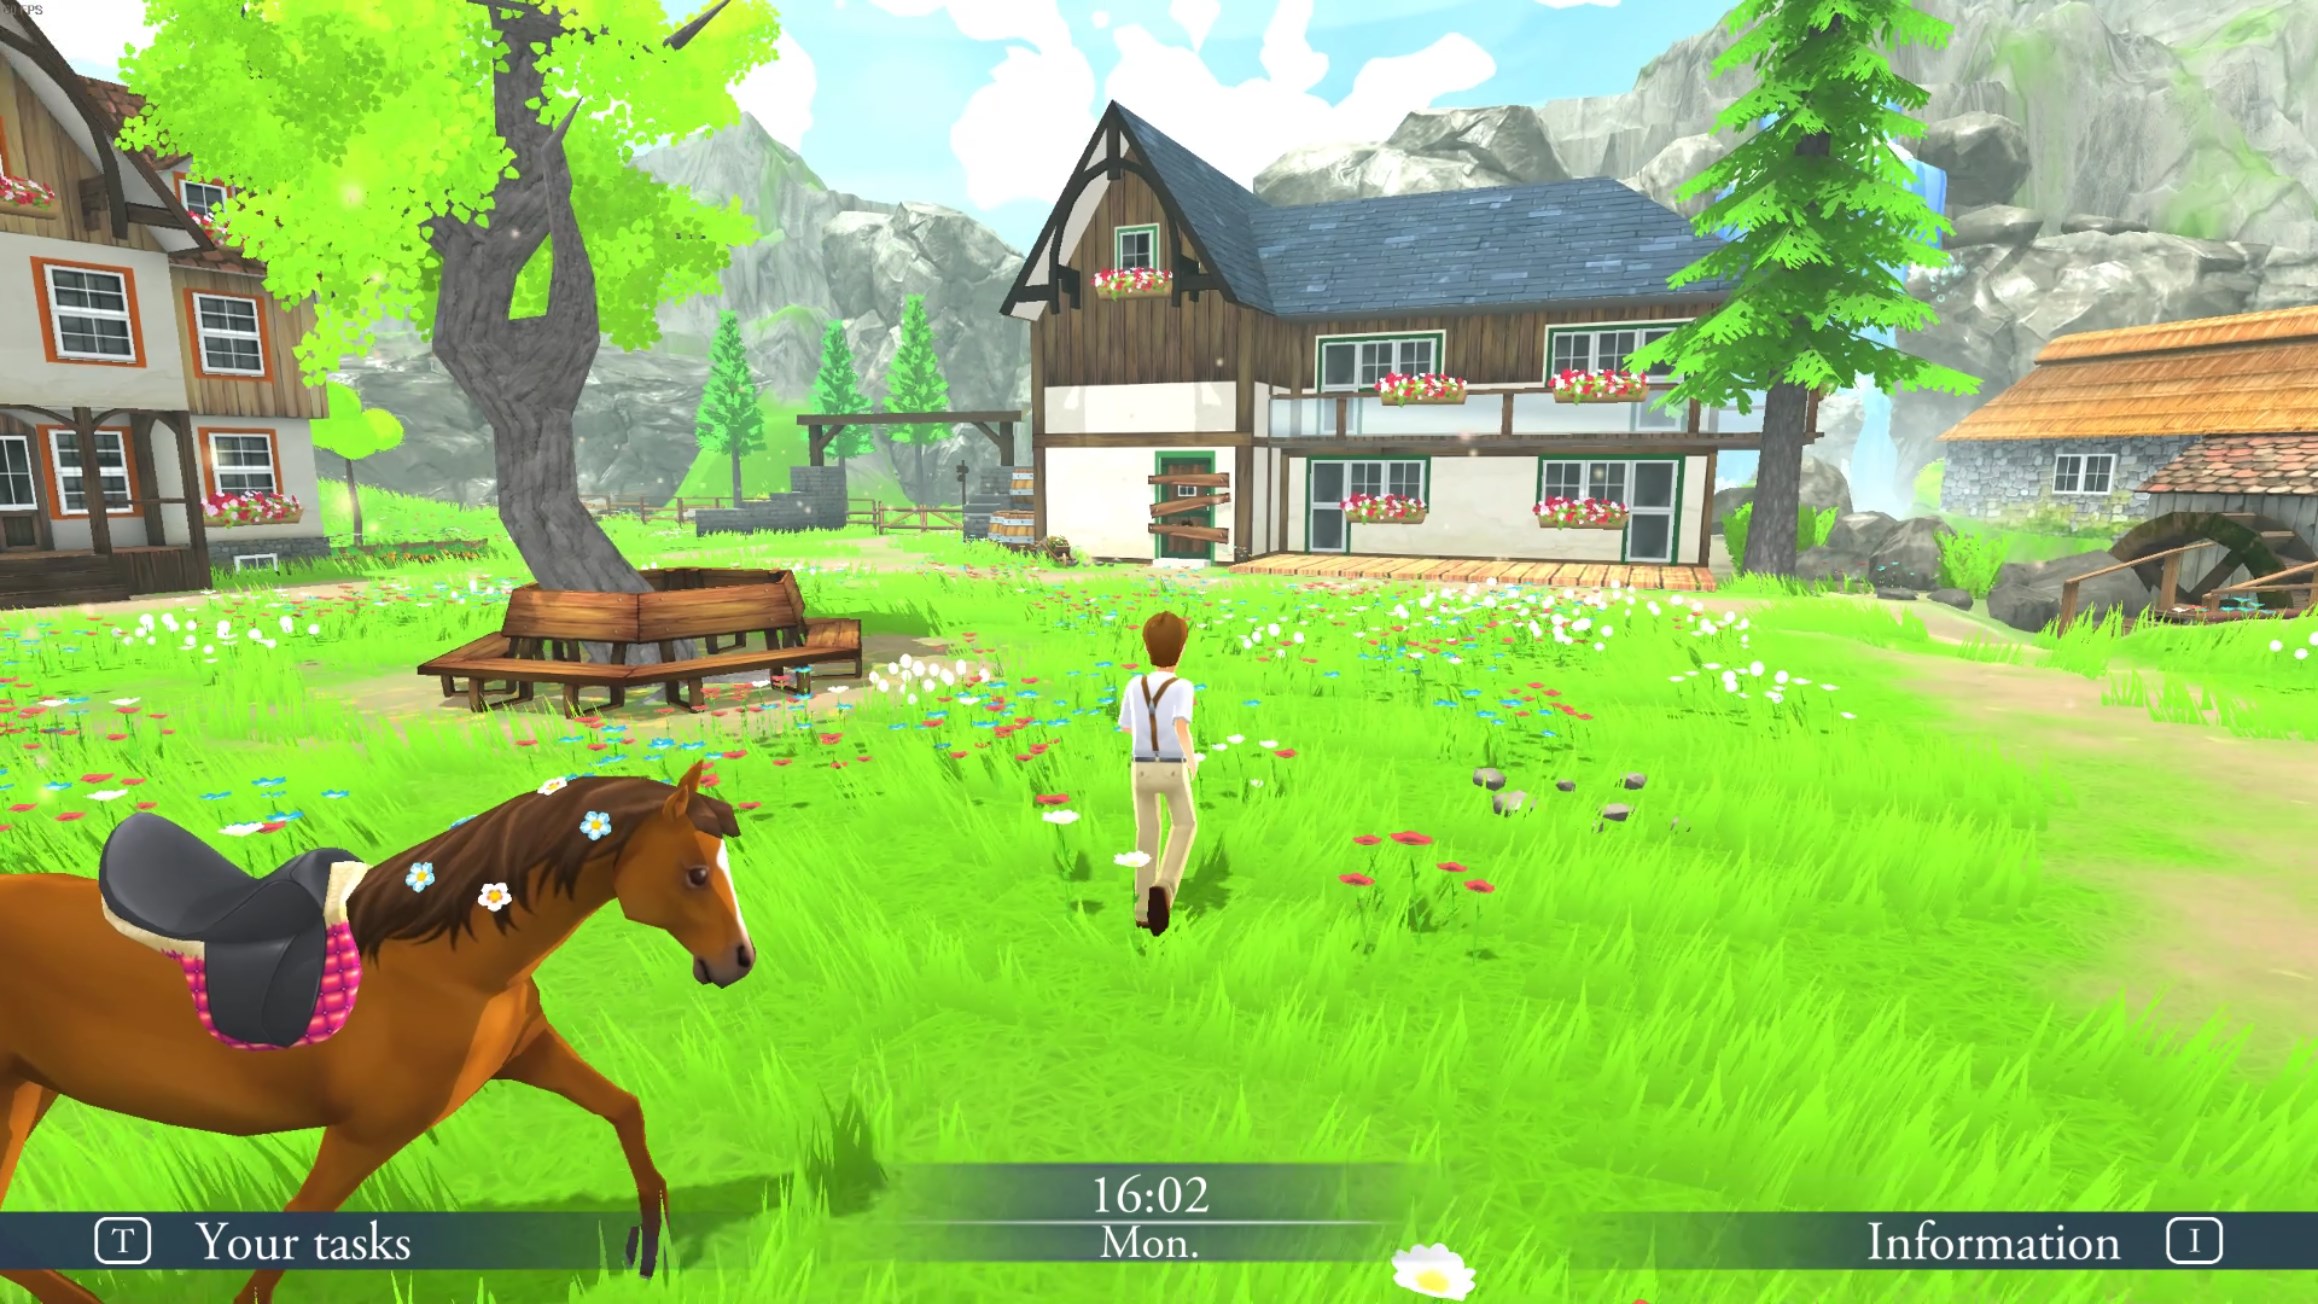 Alica Online Horse PC Game - My Horse Story - ReviewHorse Games